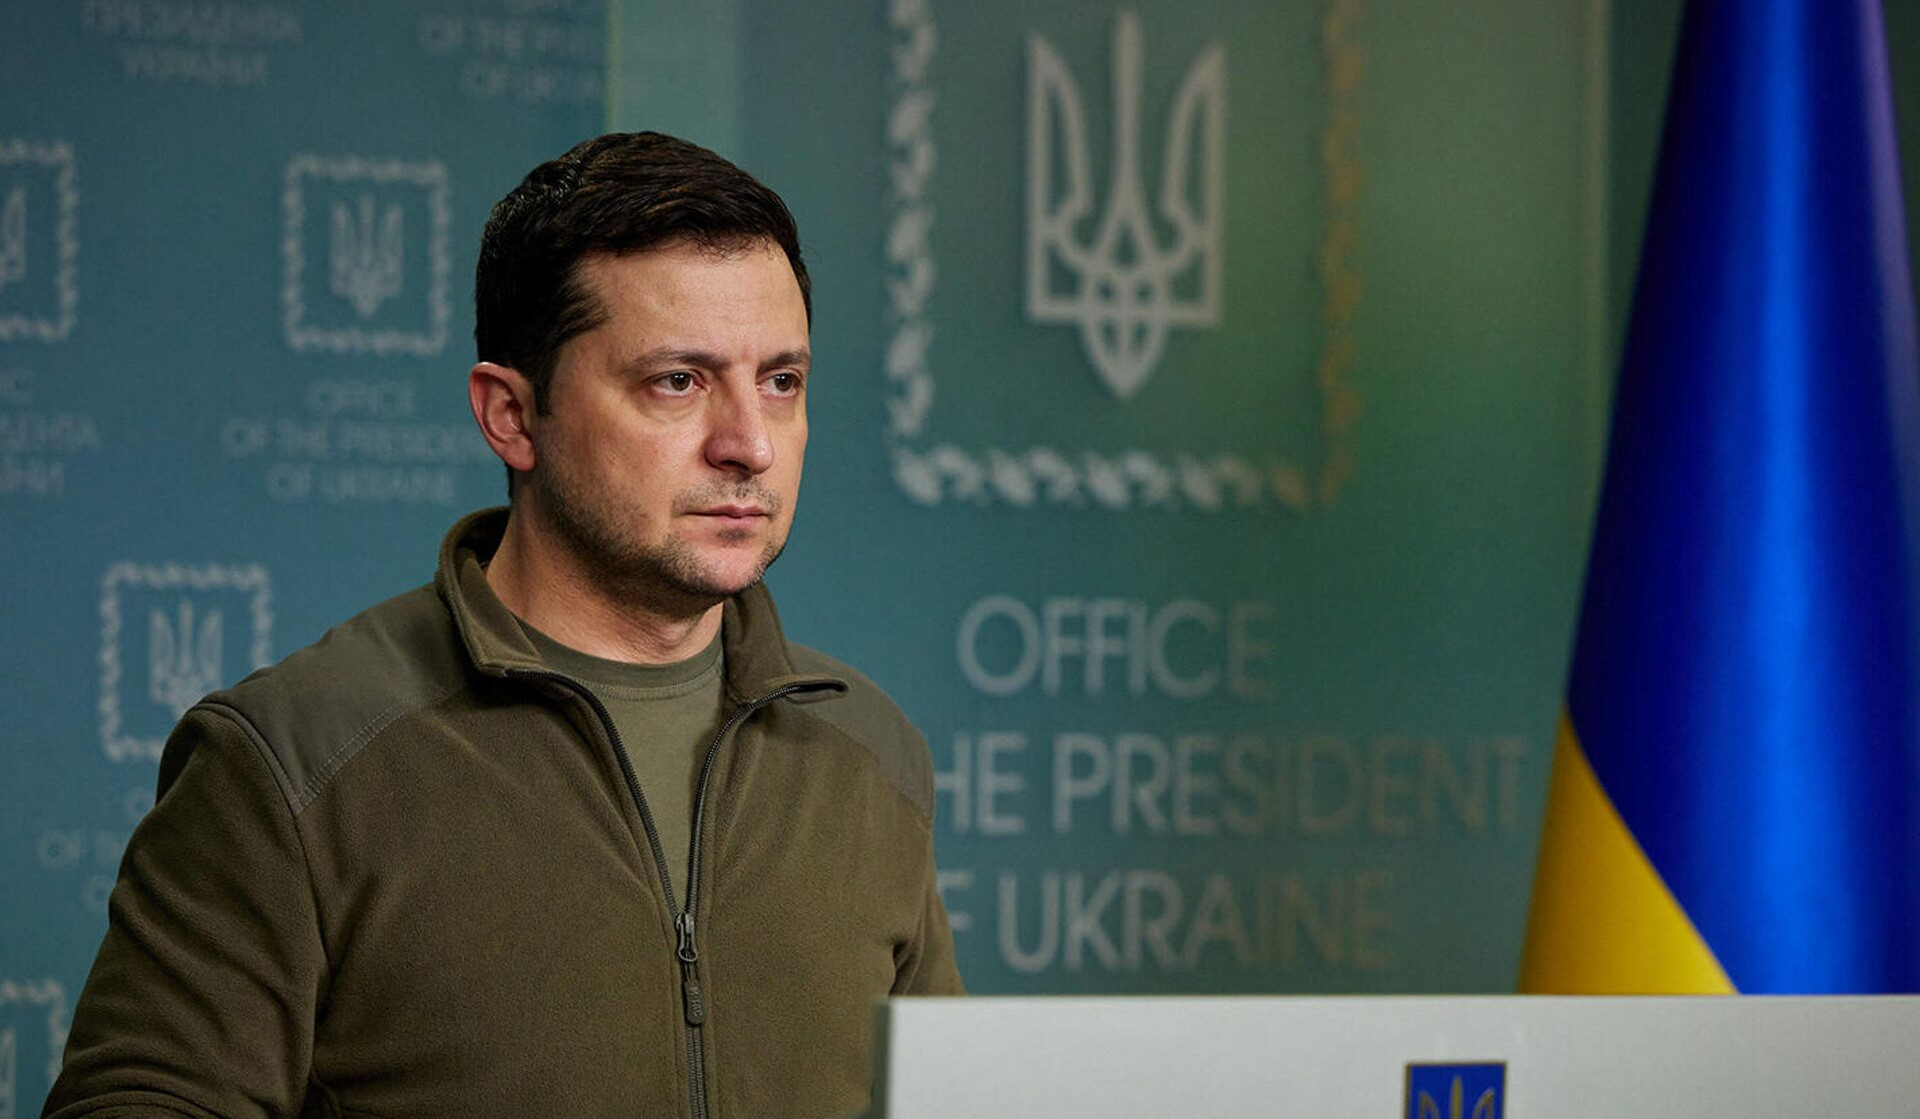 About 700 thousand people from Ukrainian side are involved in hostilities: Zelensky